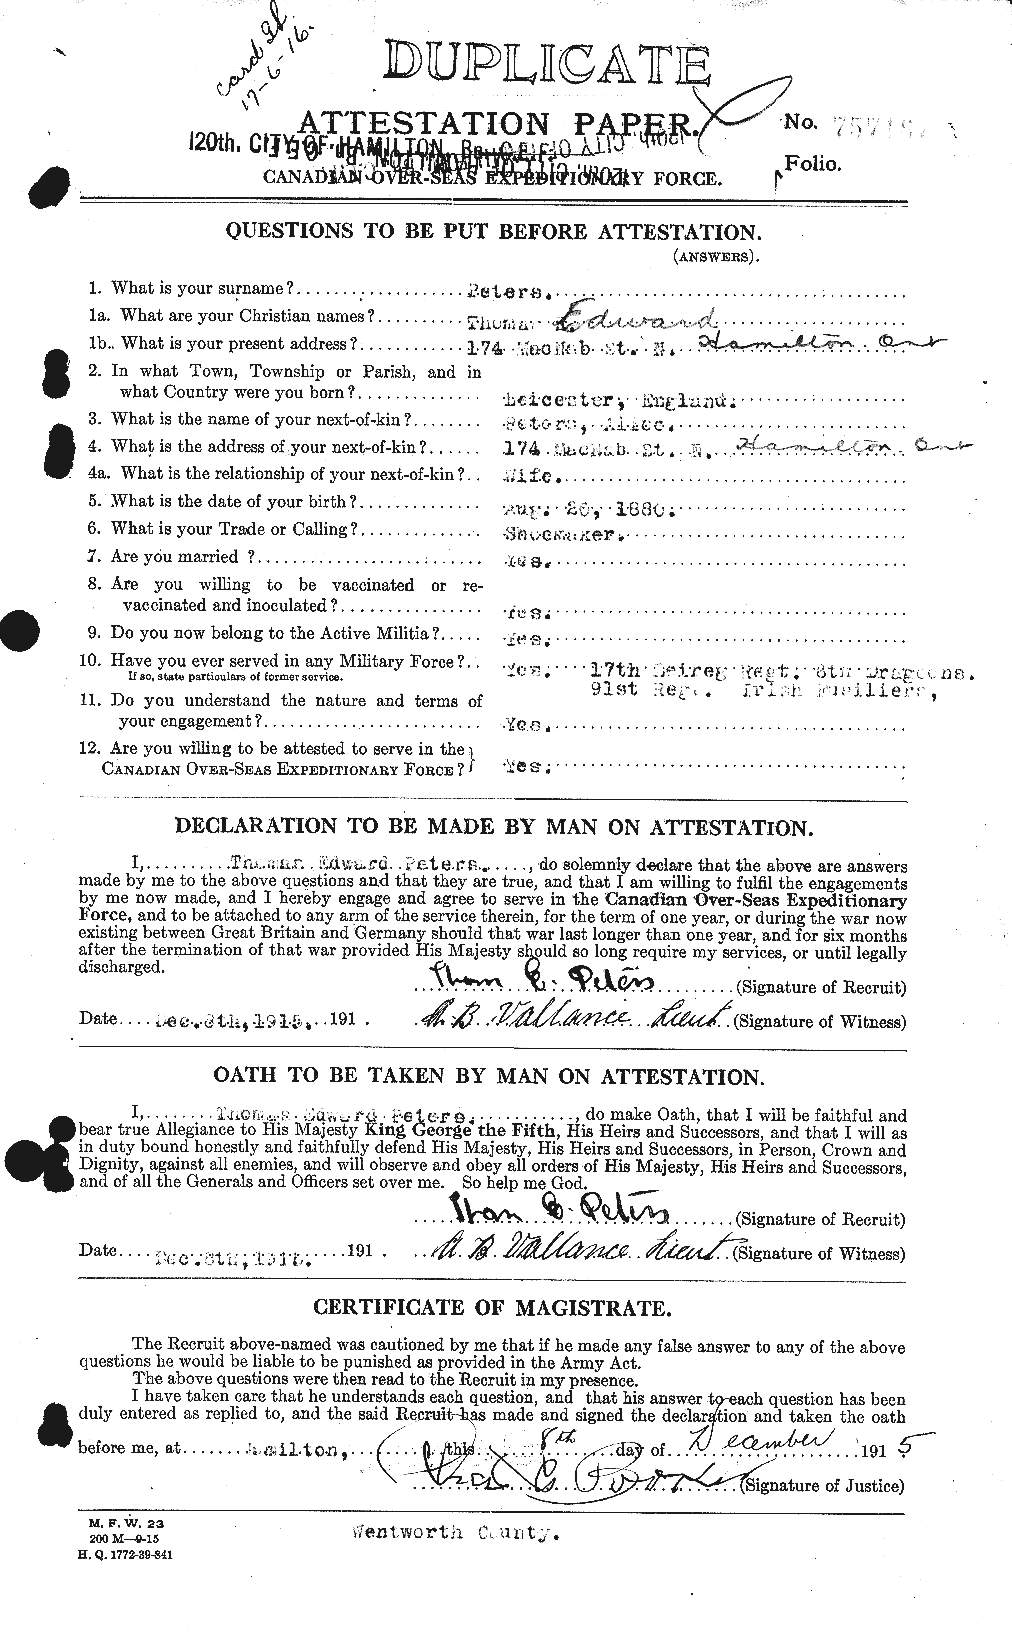 Personnel Records of the First World War - CEF 575628a